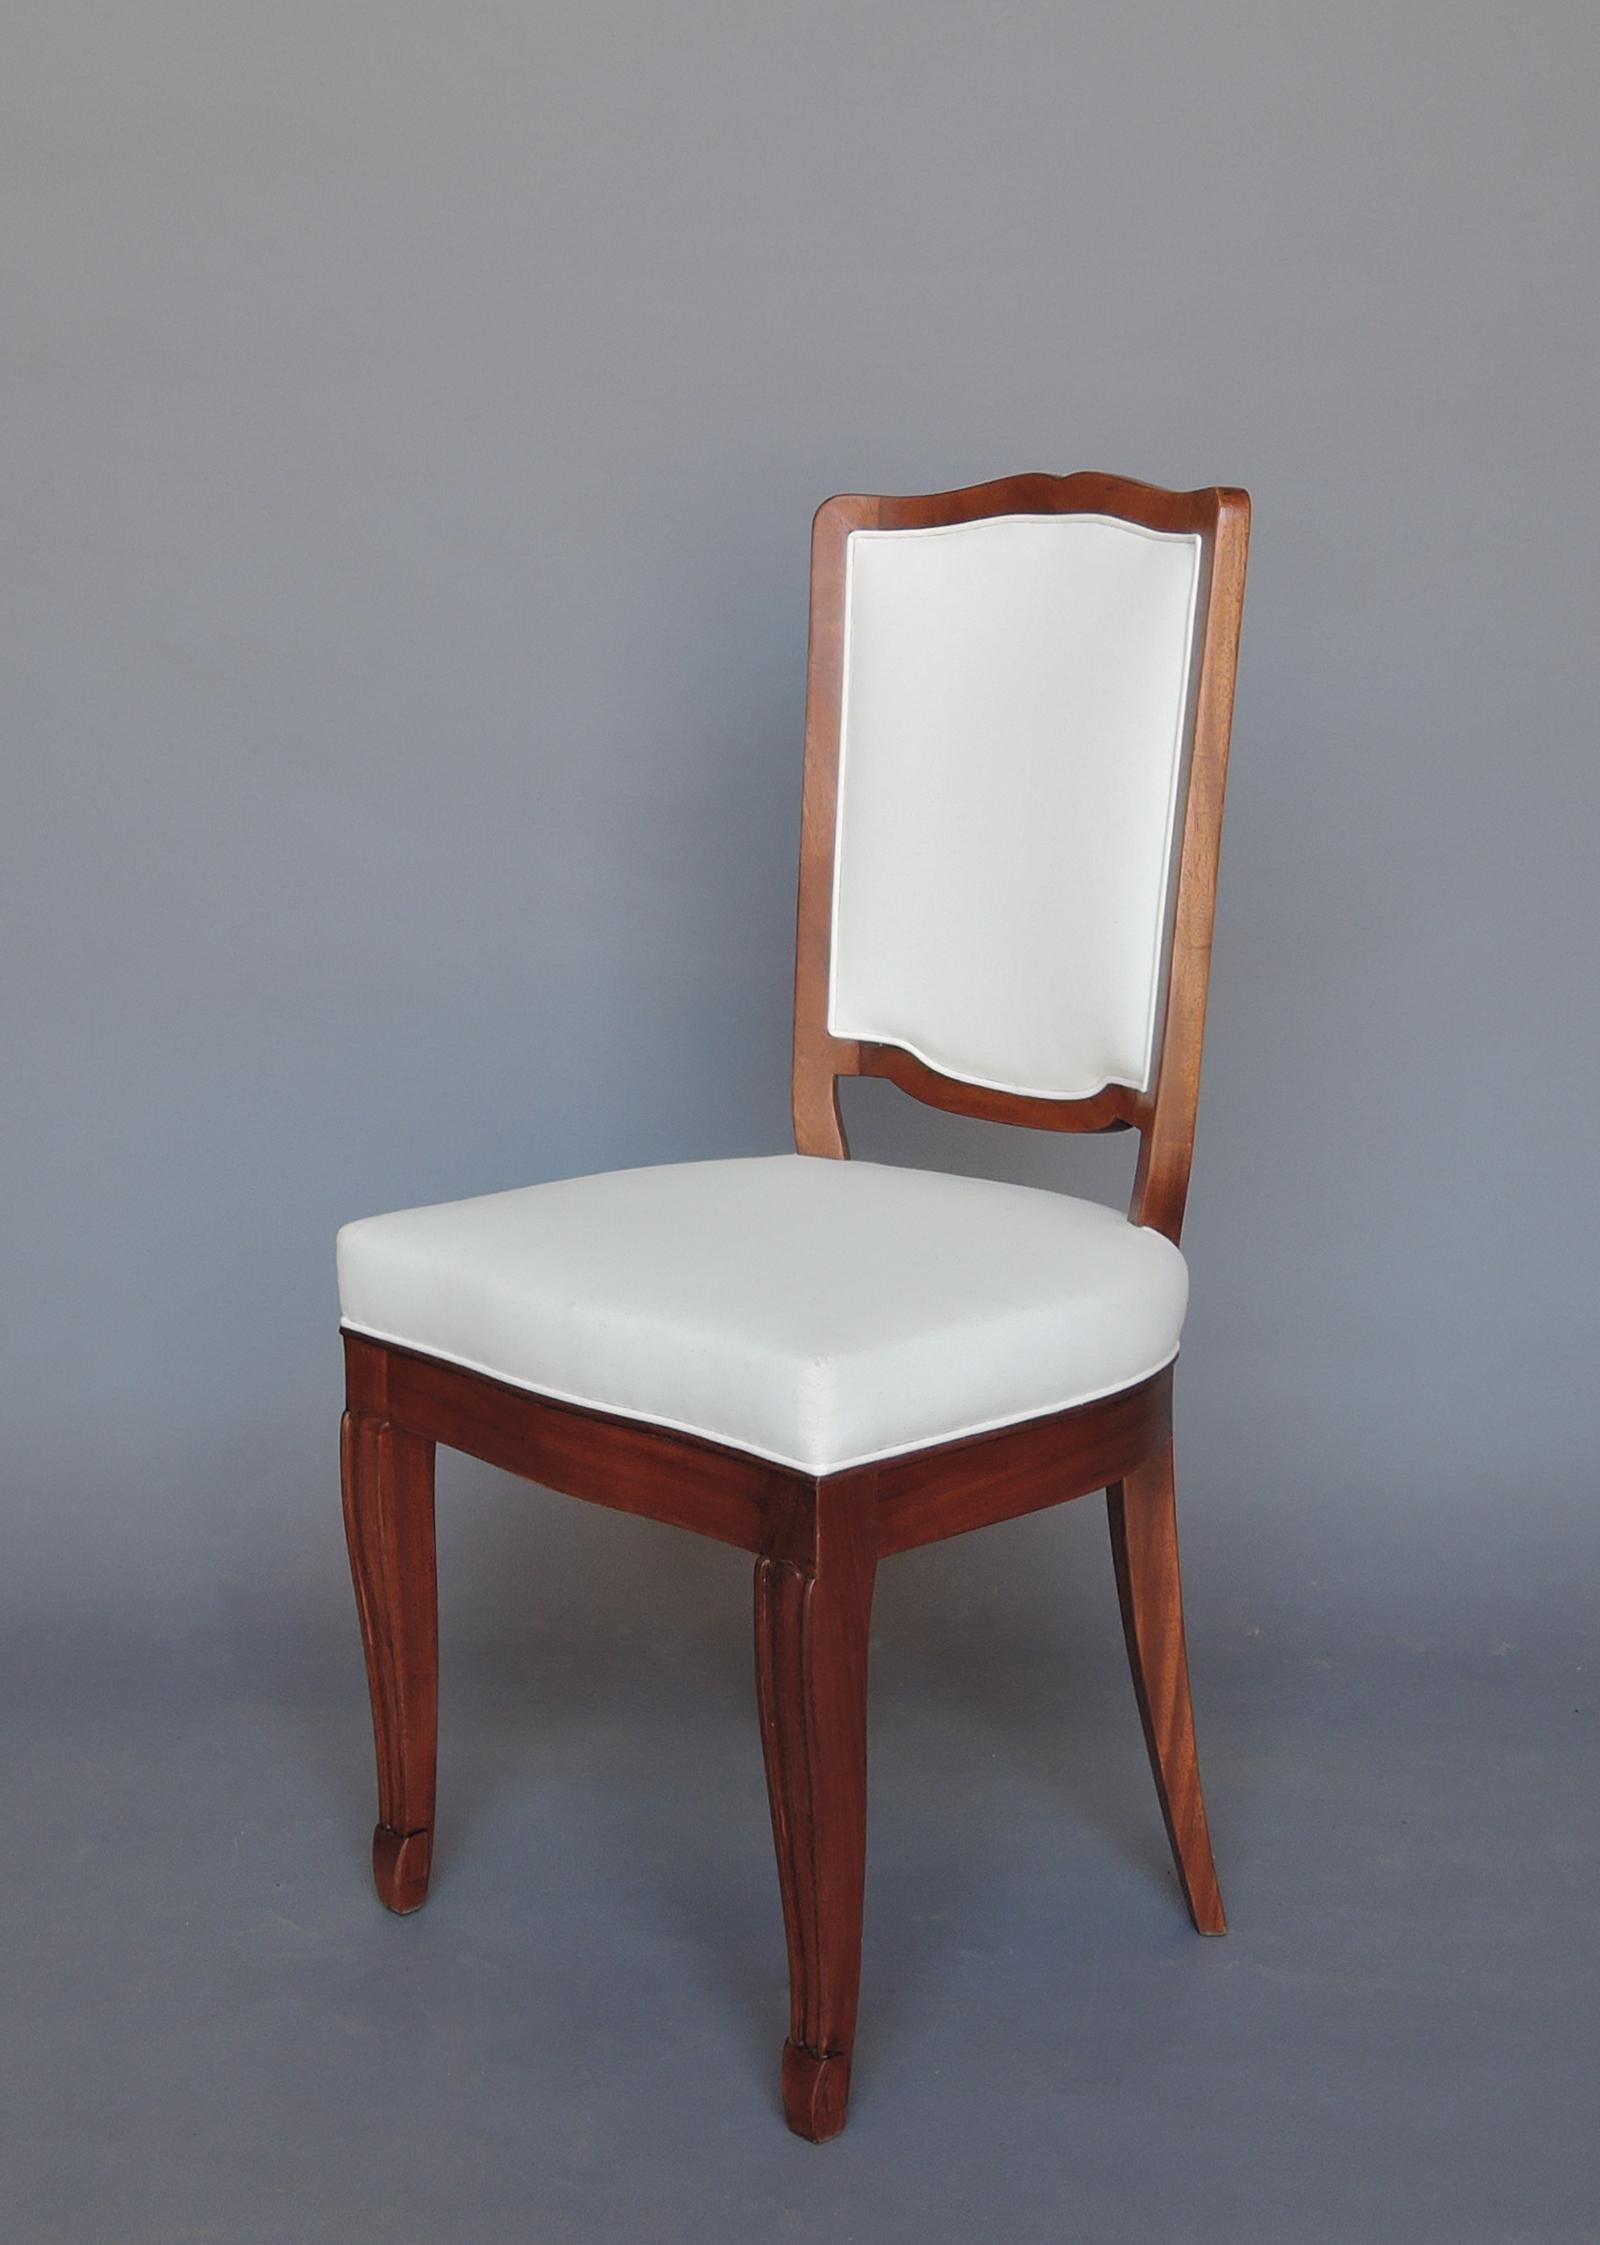 A Set of 12 Fine French Art Deco Mahogany Dining Chairs in the Manner of Arbus For Sale 5